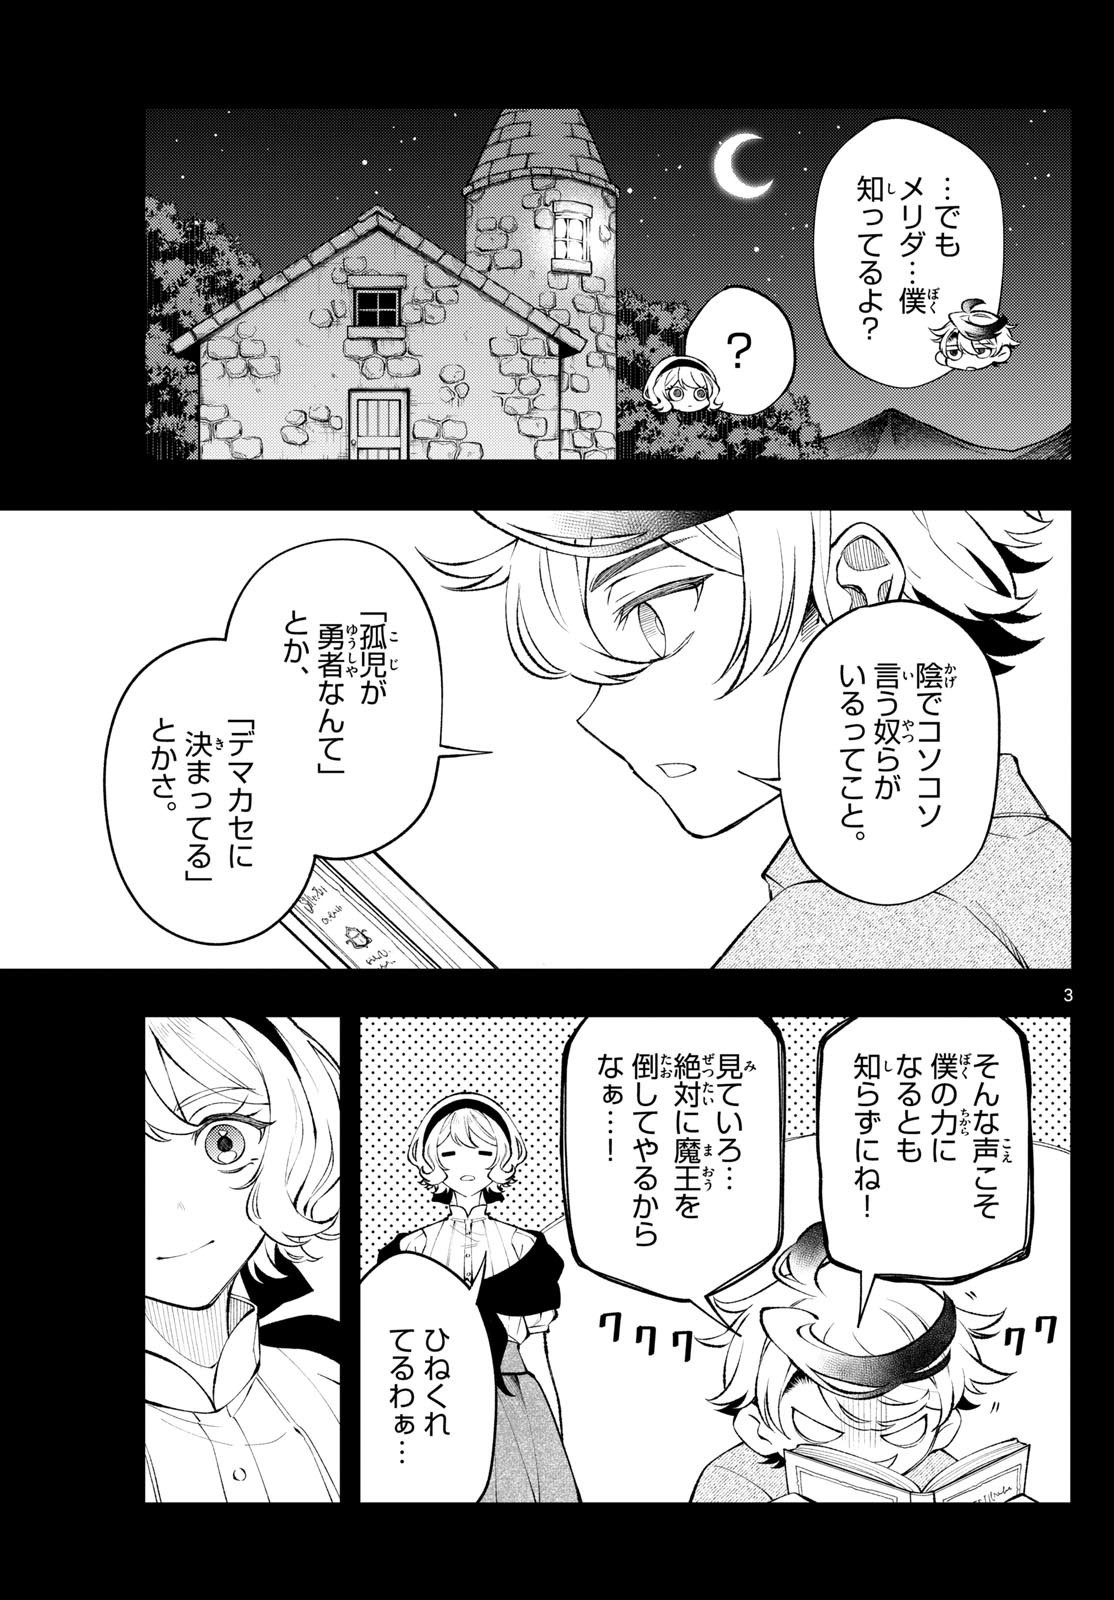 Kaiten no Albus - Chapter 9 - Page 3